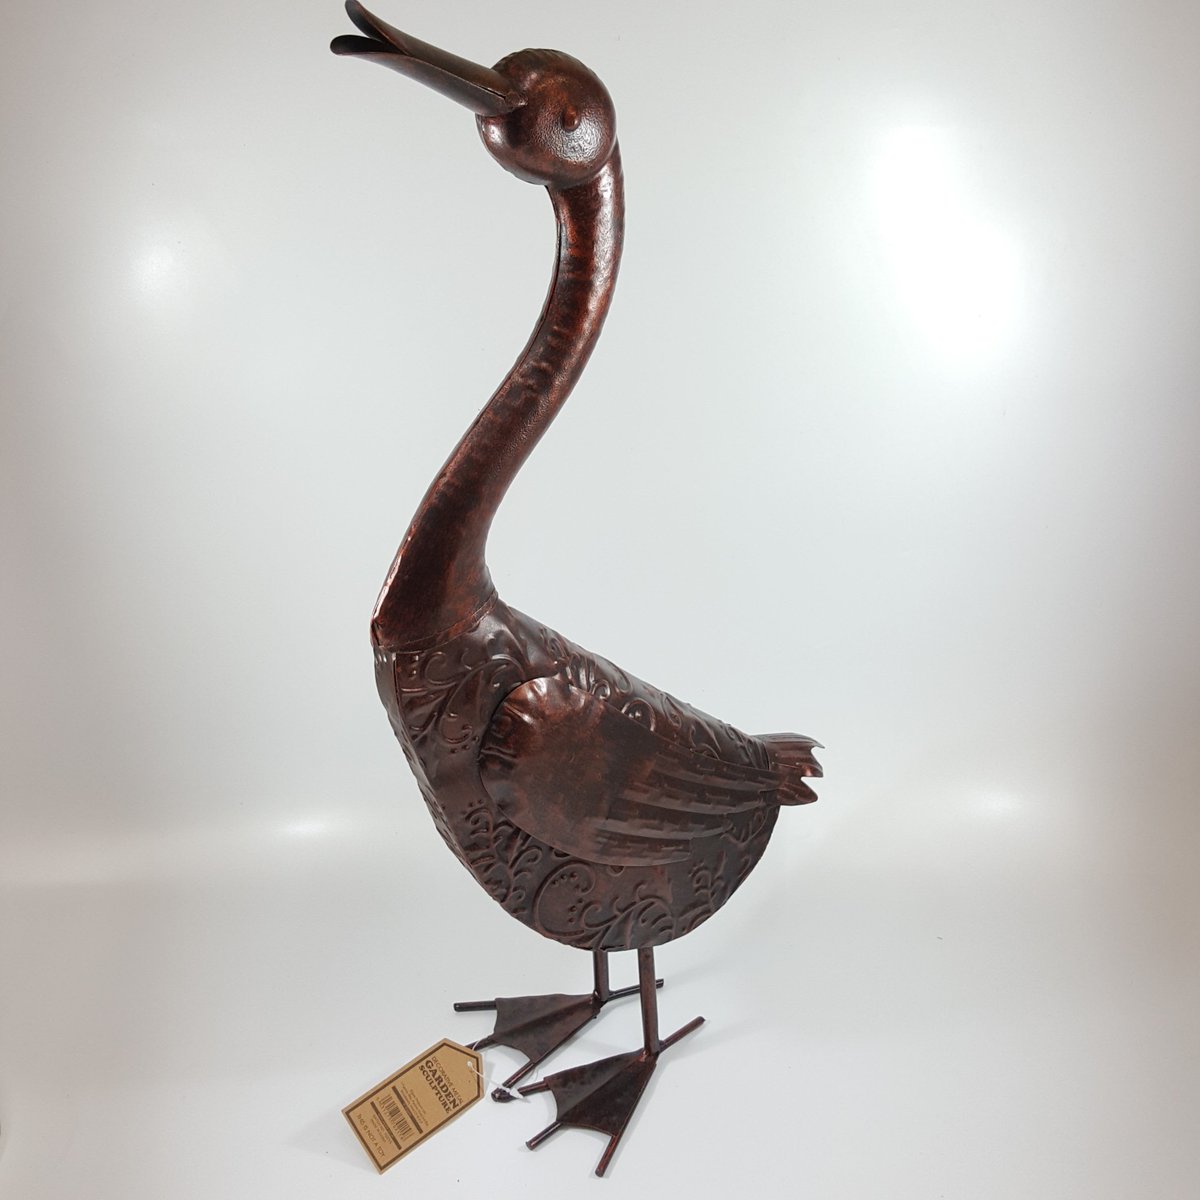 Bronze duck for your lovely garden #giftsforgardeners #themedgifts
buff.ly/2dloeFw